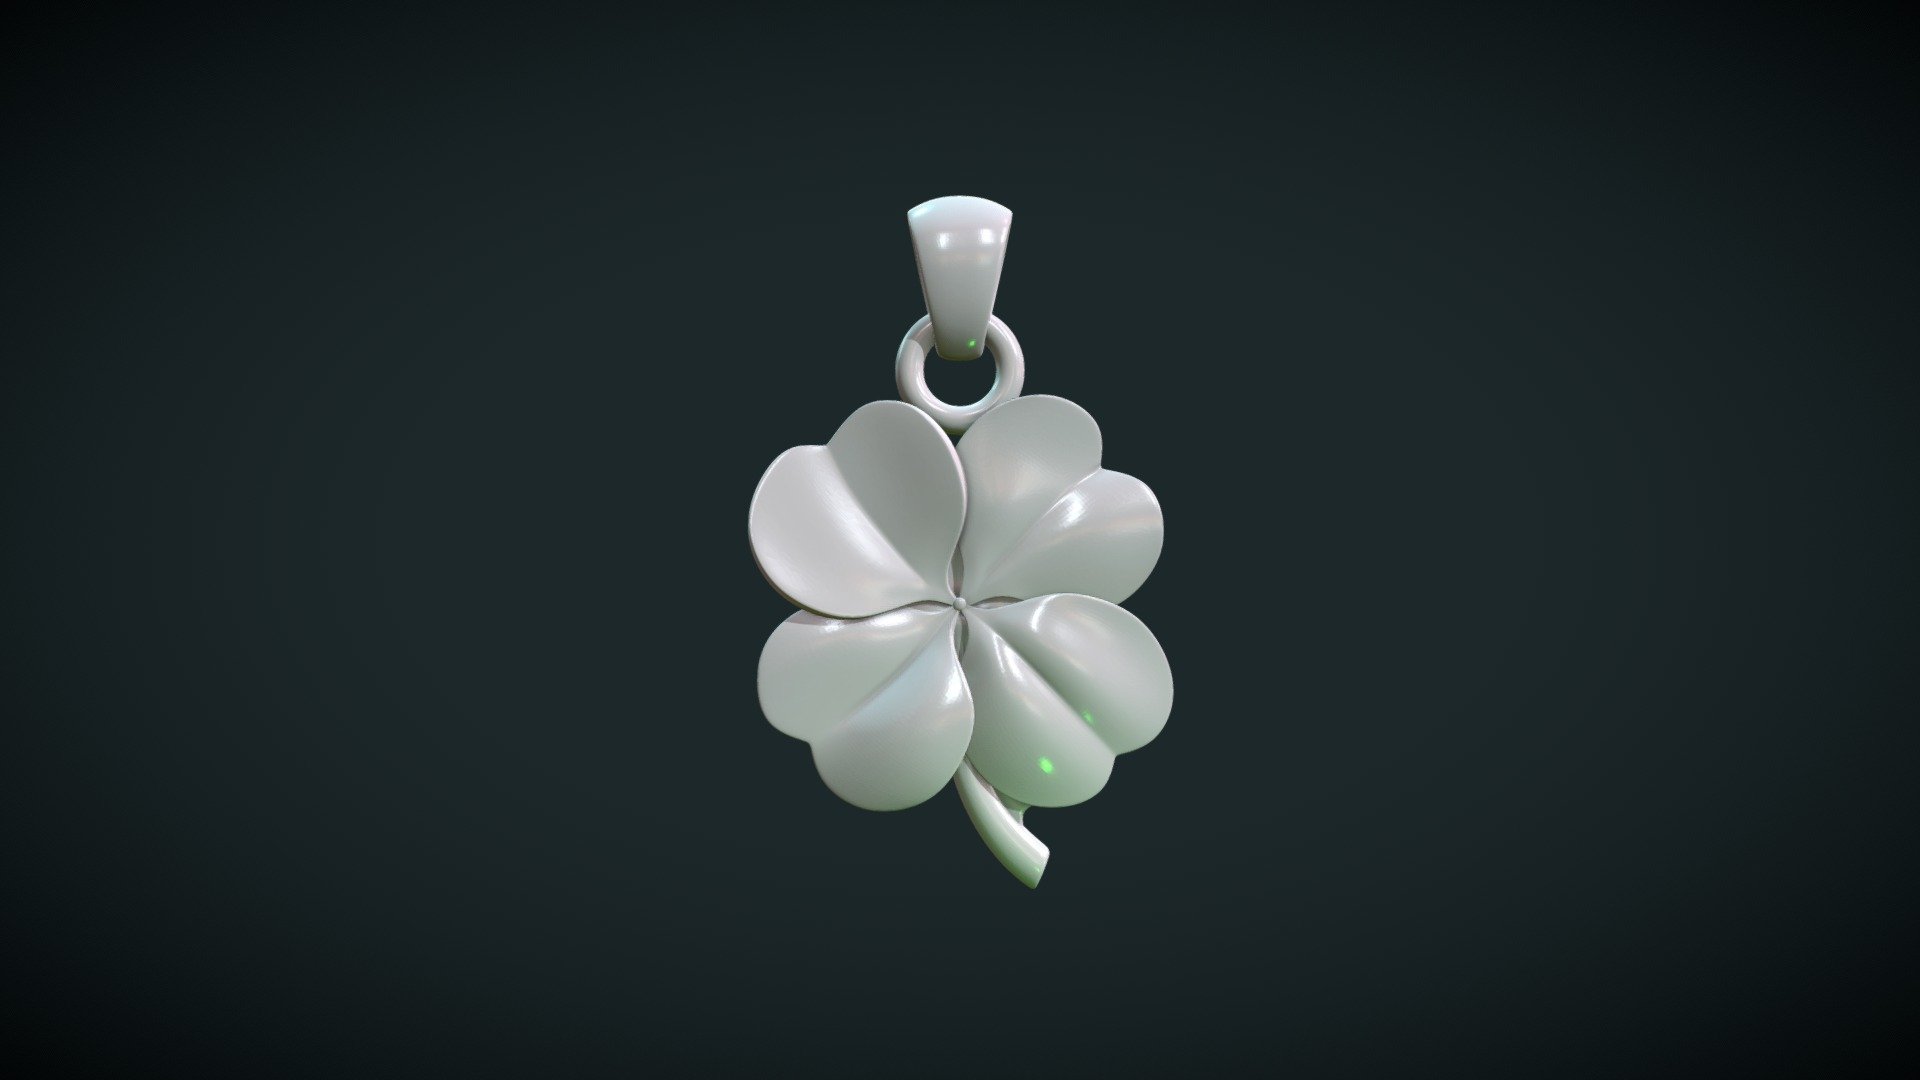 Print ready clover pendant.

Measure units are millimeters, it is about 2 cm in width.

Mesh is manifold, no holes, no inverted faces, no bad contiguous edges.

Here is two version of the model:

1) Clover.blend (.stl, .obj, .fbx, .dae) Here is just a clover, the model consists of 96694 triangular faces.

2) Clover_Pendant.blend (.stl, .obj, .fbx, .dae) Here is a pendant made from the clover the model consists of 154872 triangular faces. For .stl format the bail and the pendant itself are in separate files.

Available formats: .blend, .stl, .obj, .fbx, .dae - Clover_Pendant - Buy Royalty Free 3D model by Skazok 3d model